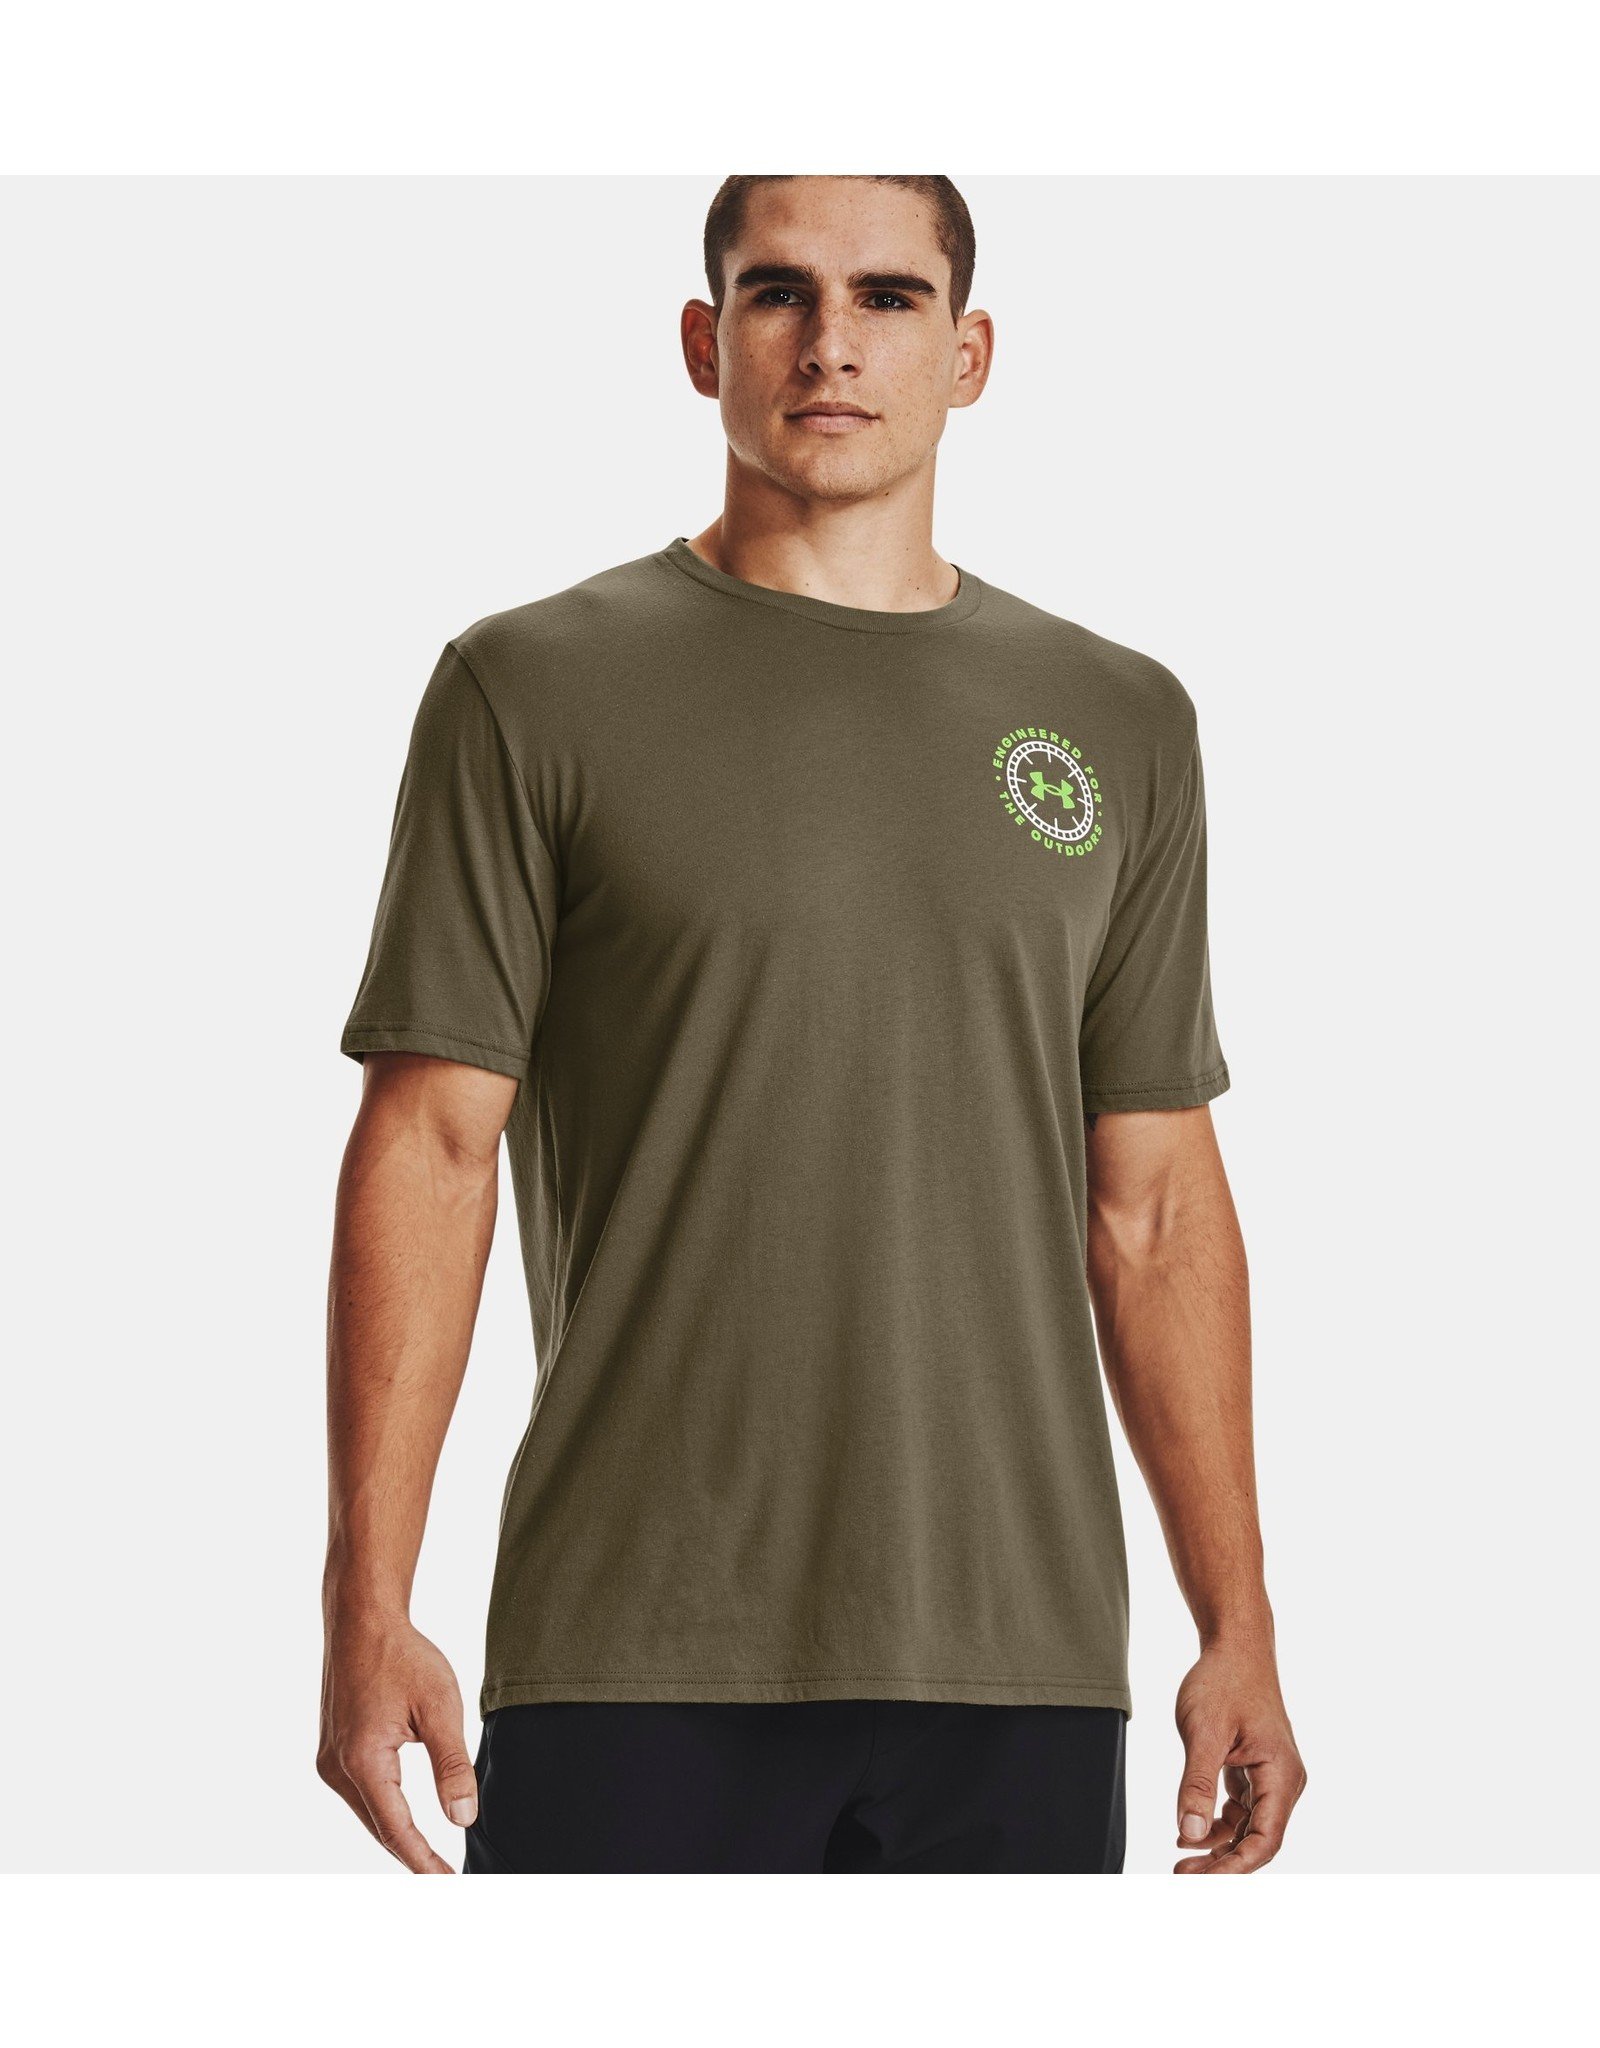 Under Armour Under Armour Mens Engineered Compass T-Shirt